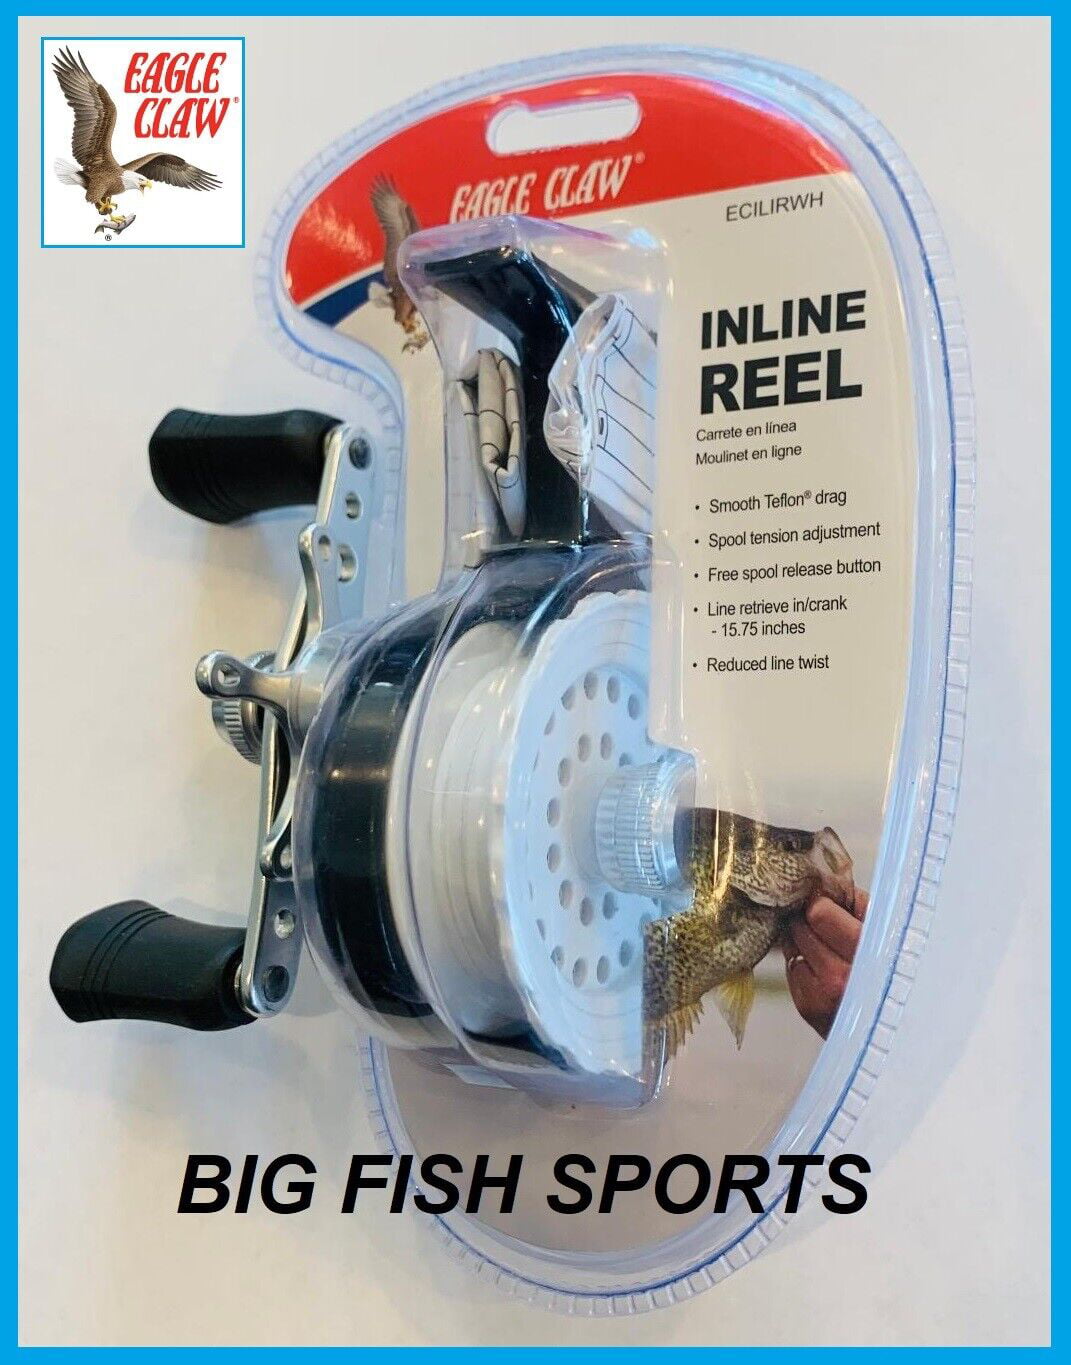 EAGLE CLAW Inline Ice Reel #ECILIRWH NEW! Crappie, Bass, Panfish